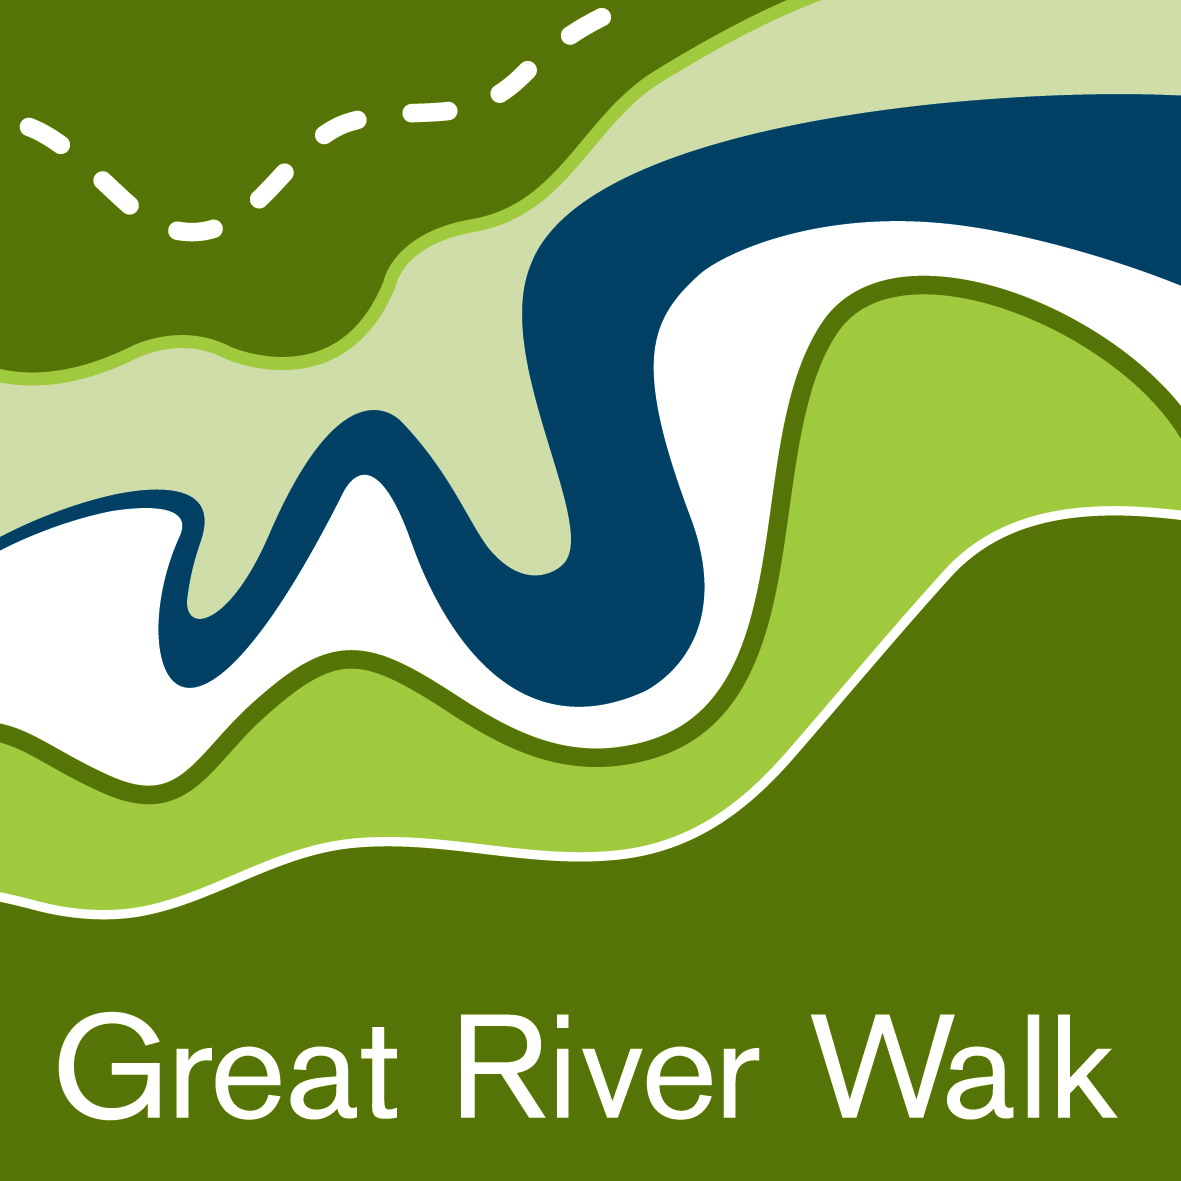 The Great River Walk